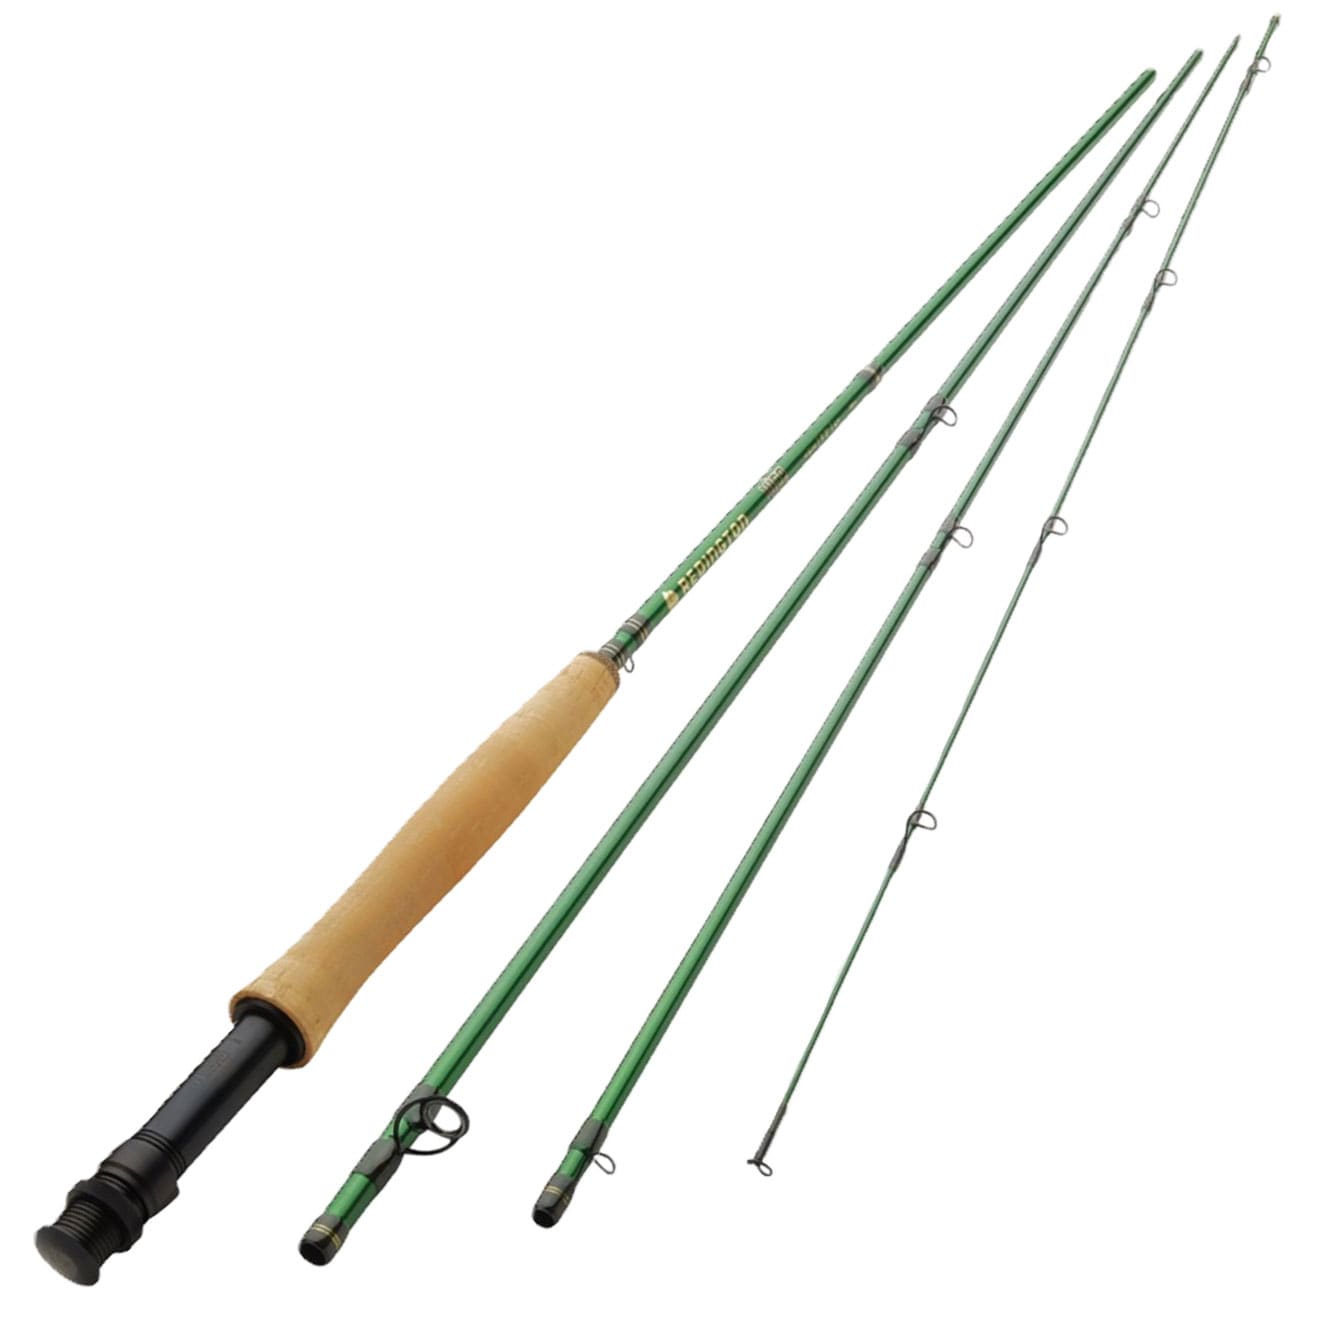 Redington Easy-casting 9ft 5lb Fly Fishing Rod - Cordura Construction -  Green Finish - Ideal for Fresh and Saltwater in the Fishing Equipment  department at